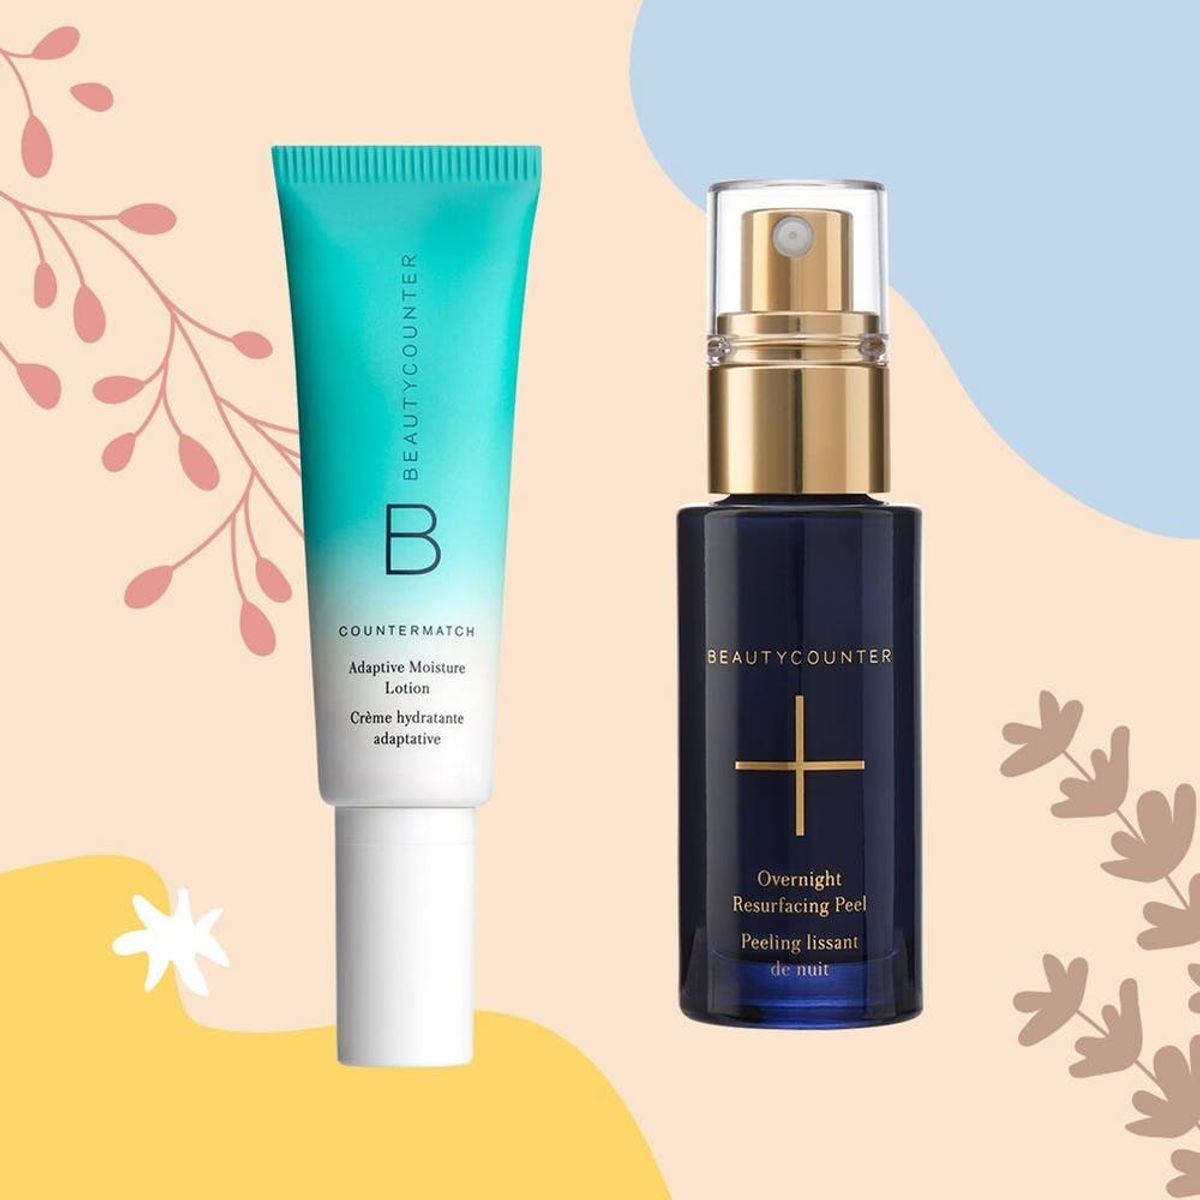 Our 4 Fave Skincare Tips to Keep You Glowing All Winter